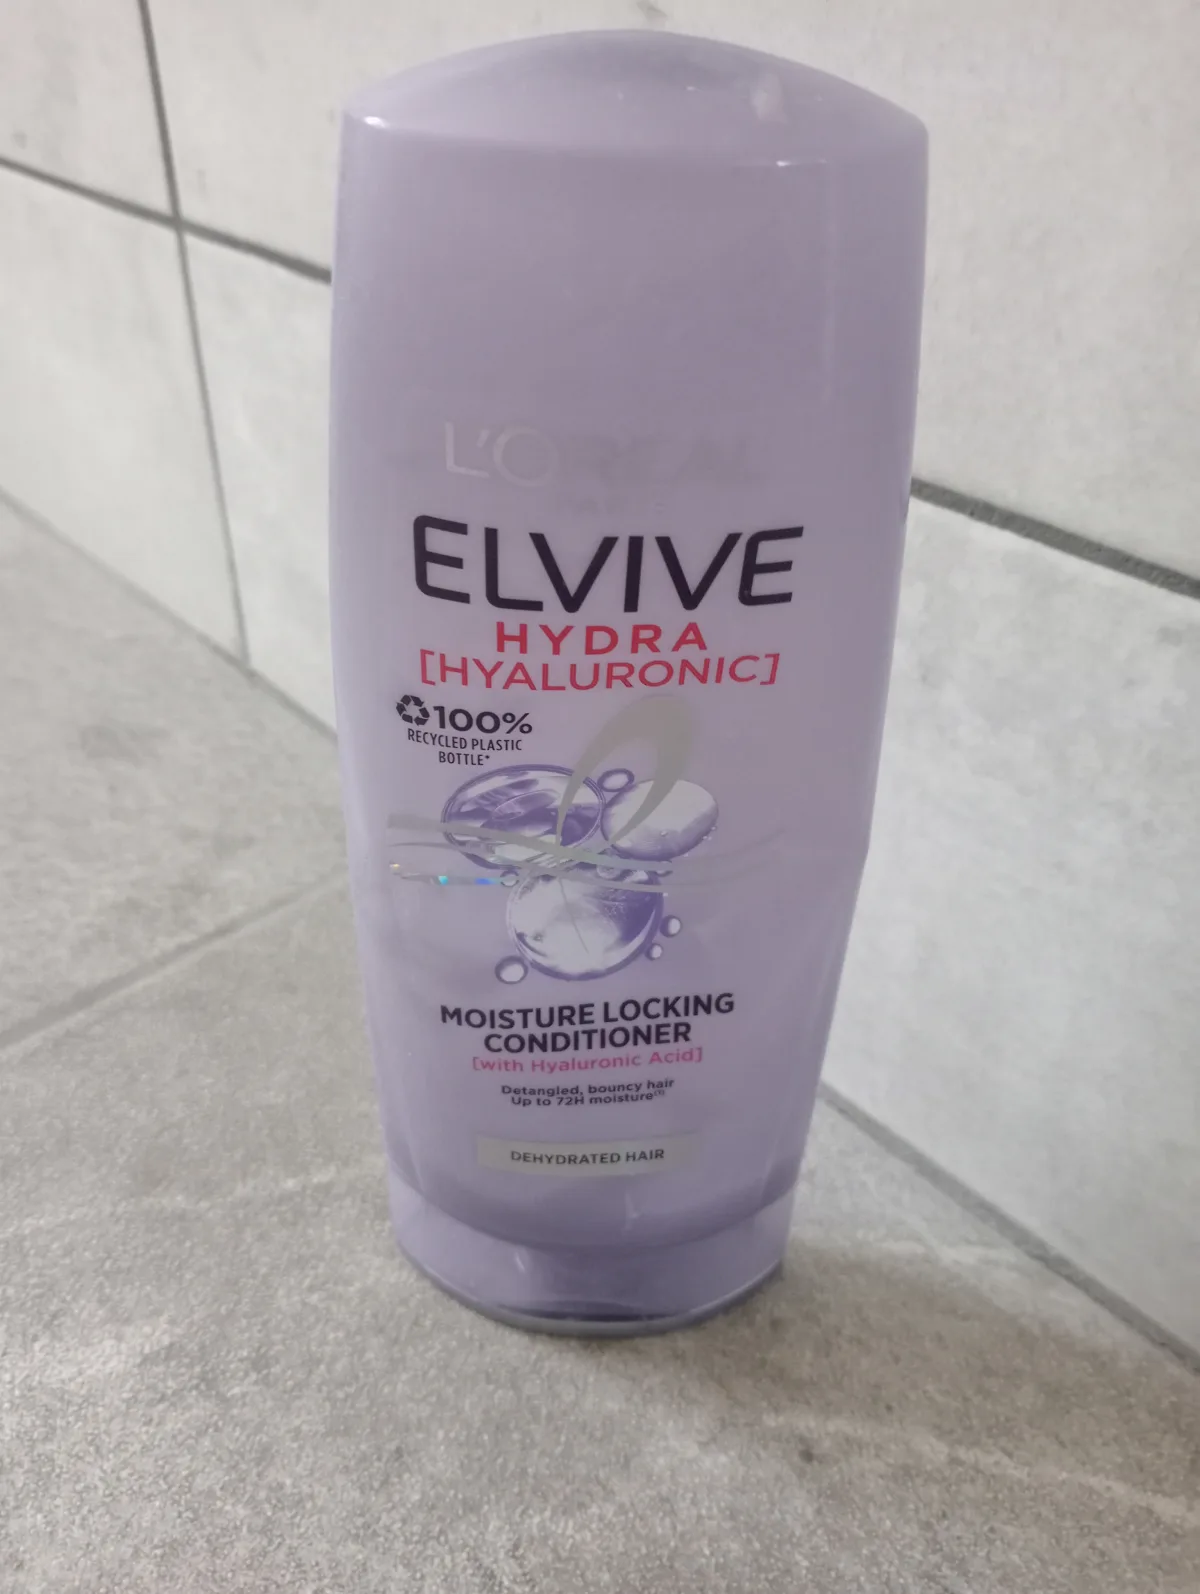 L’Oréal Paris Elvive Conditioner Hydra Hyaluronic Hydraterend - 200 ml - review image